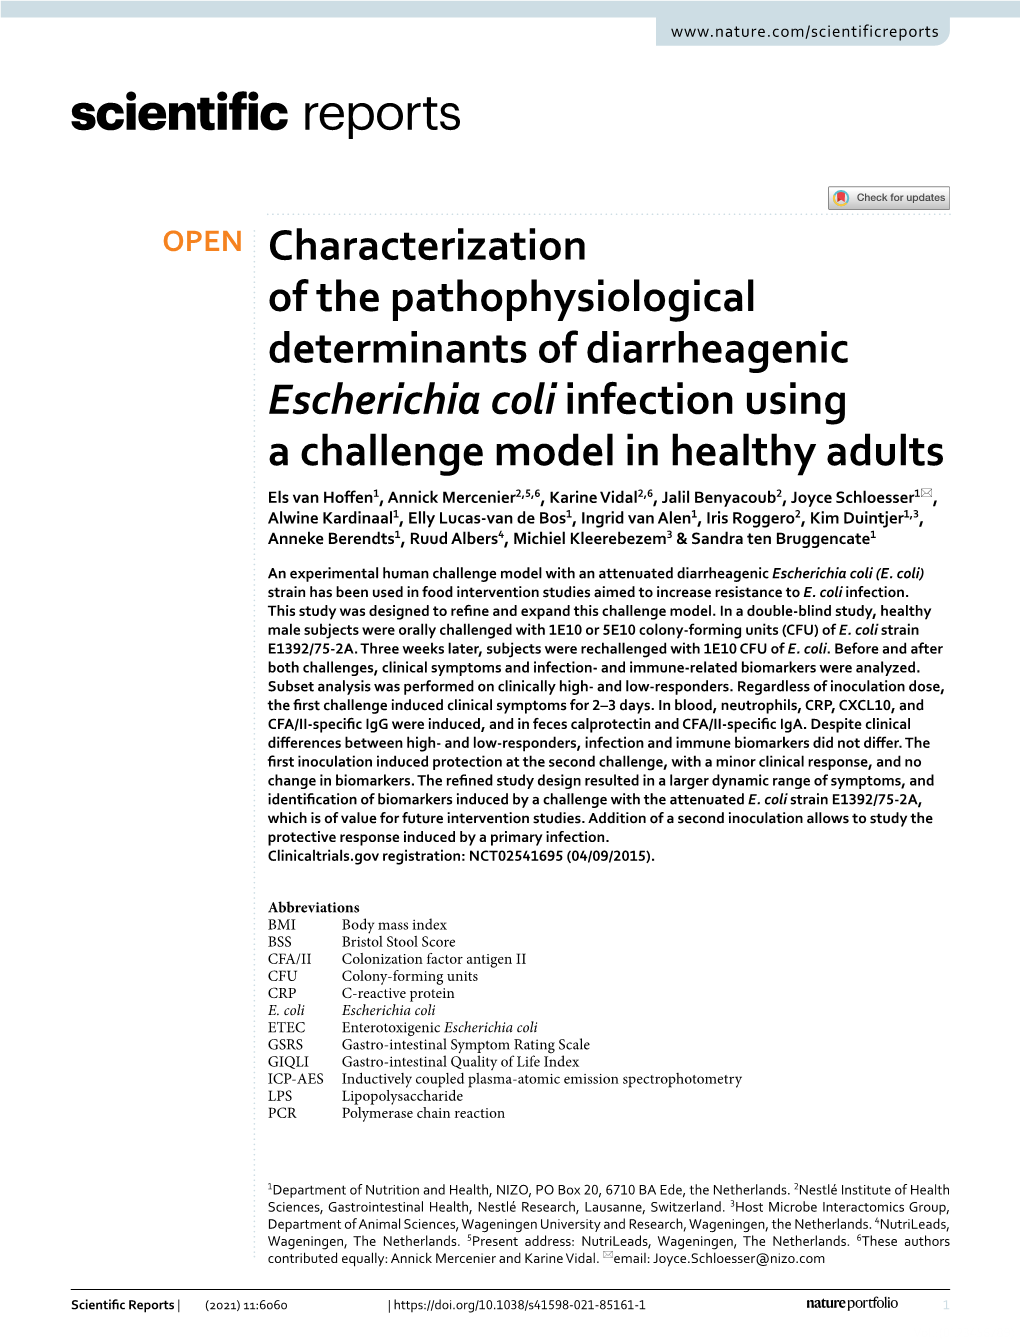 Characterization of the Pathophysiological Determinants of Diarrheagenic Escherichia Coli Infection Using a Challenge Model in H